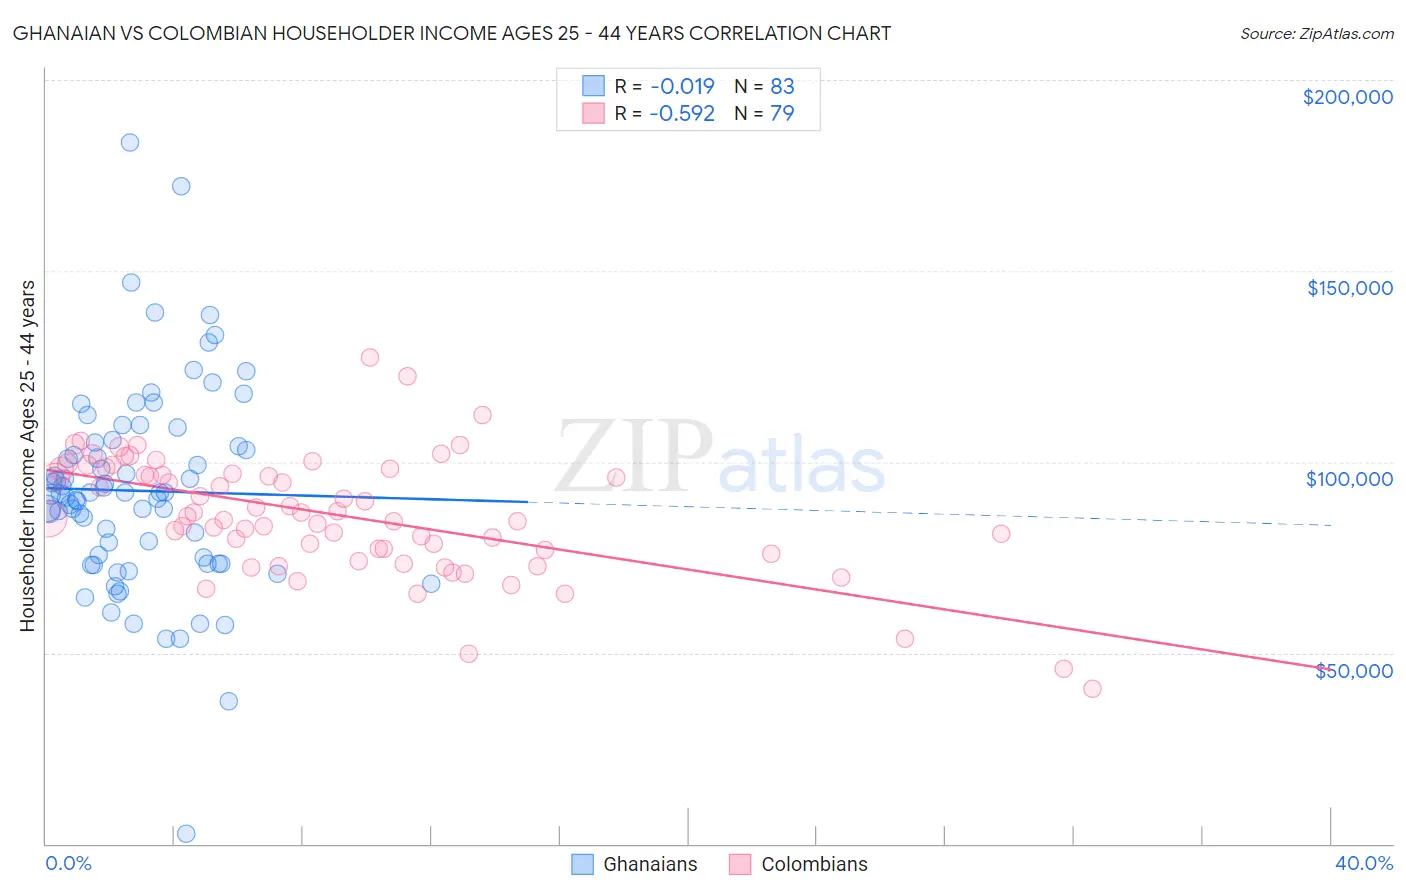 Ghanaian vs Colombian Householder Income Ages 25 - 44 years